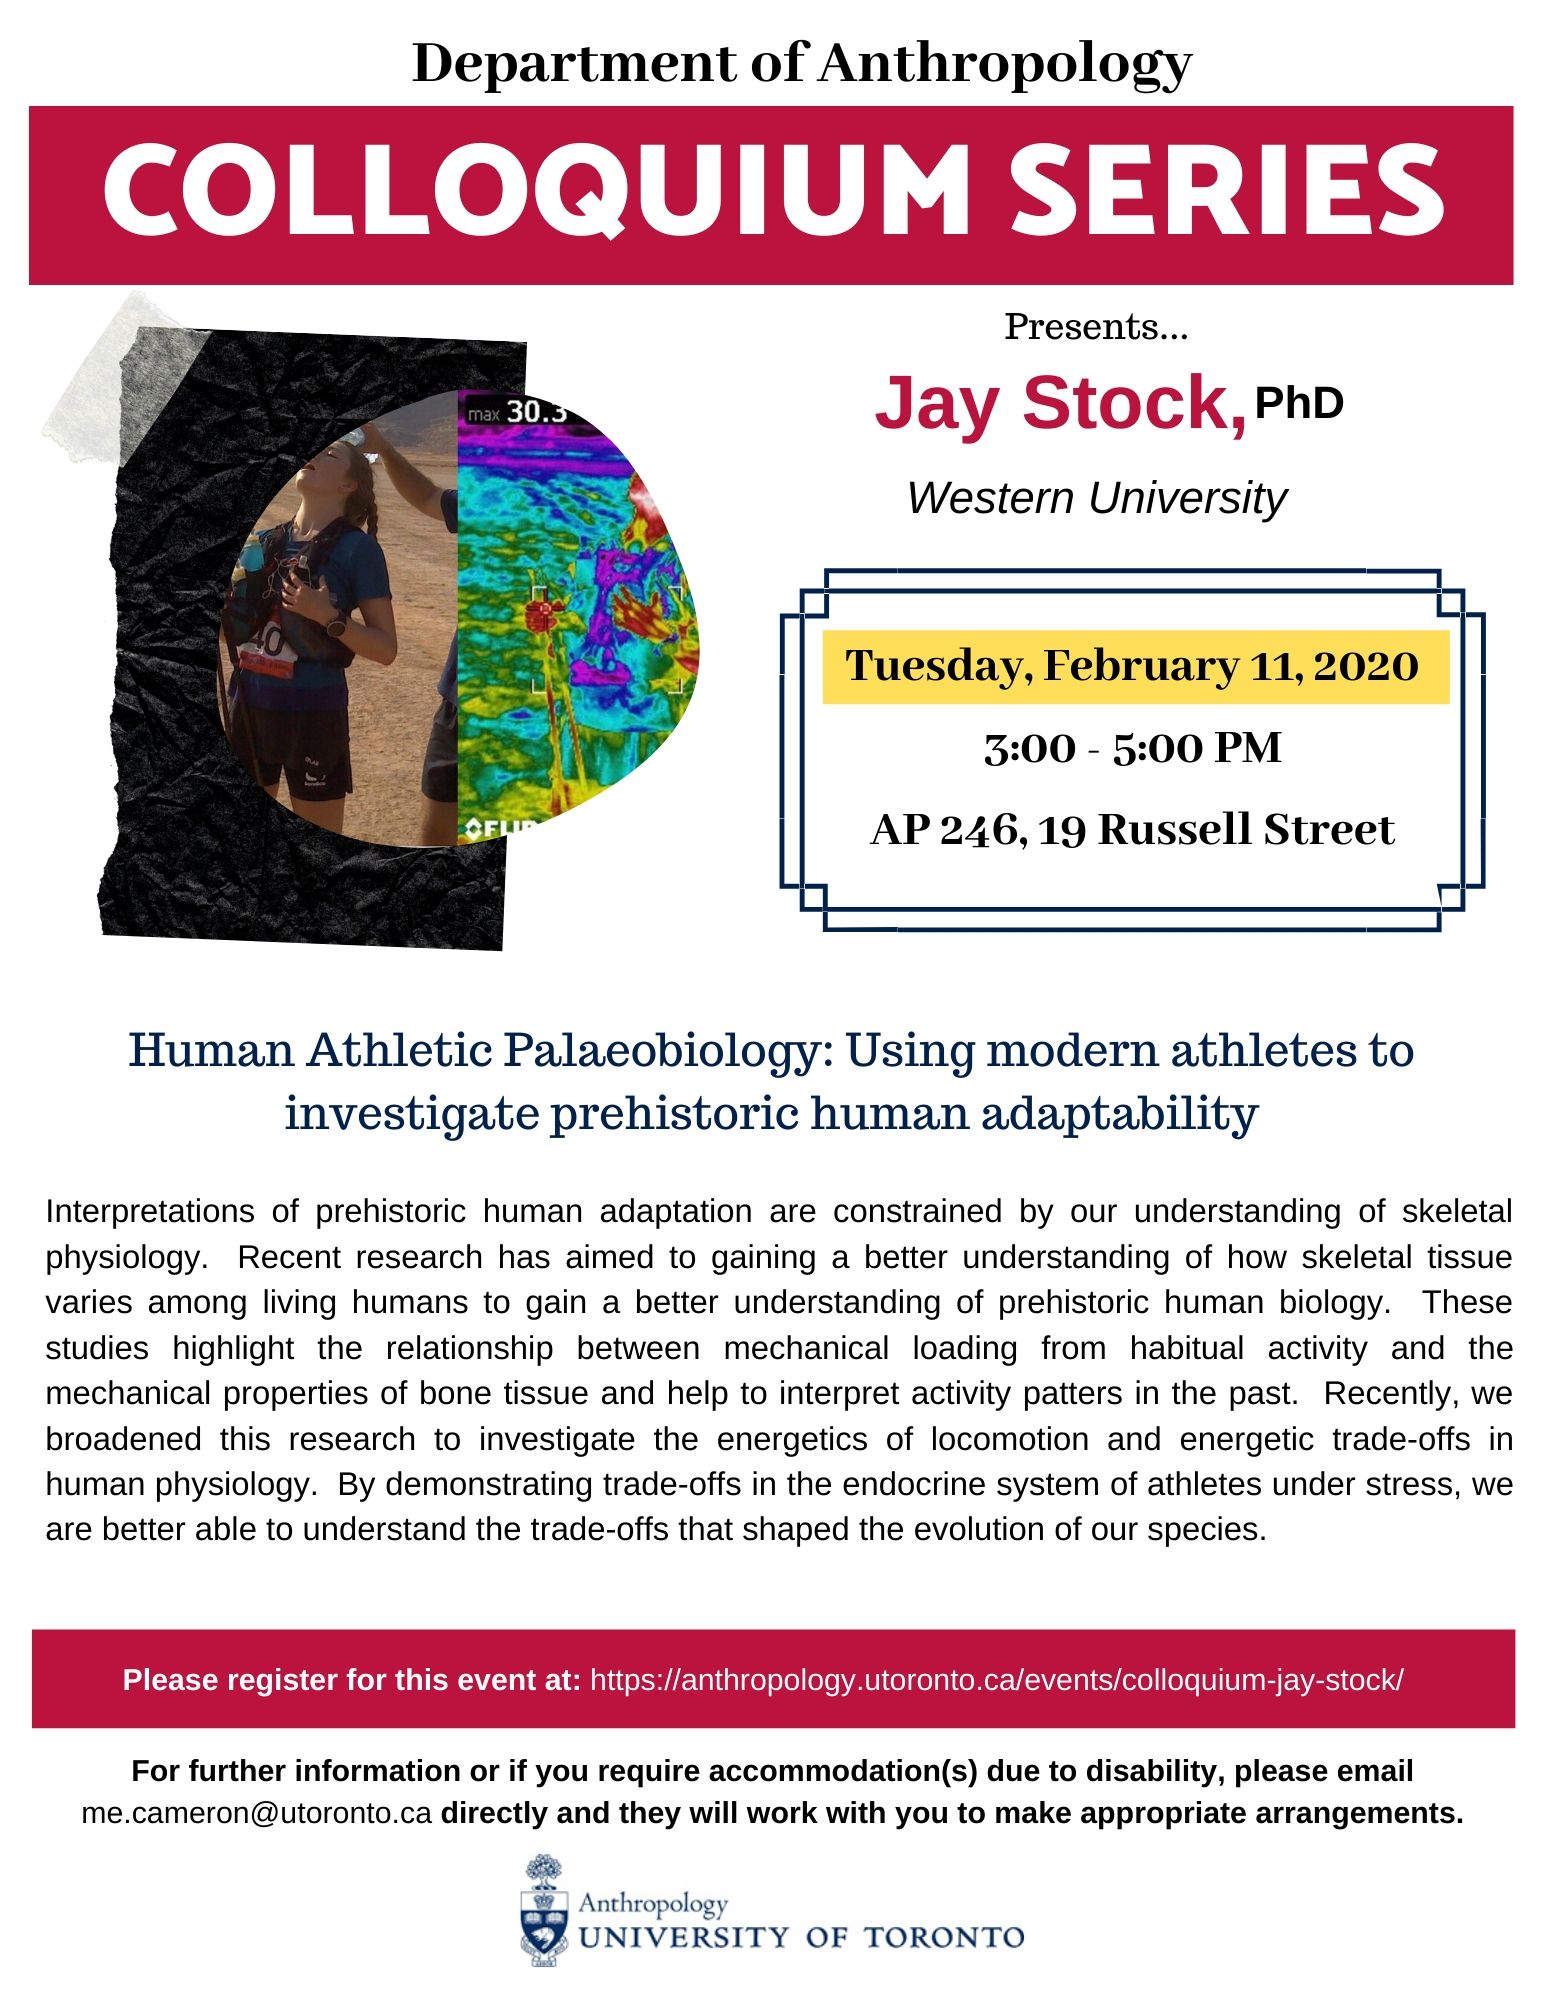 Poster featuring Dr. Jay Stock